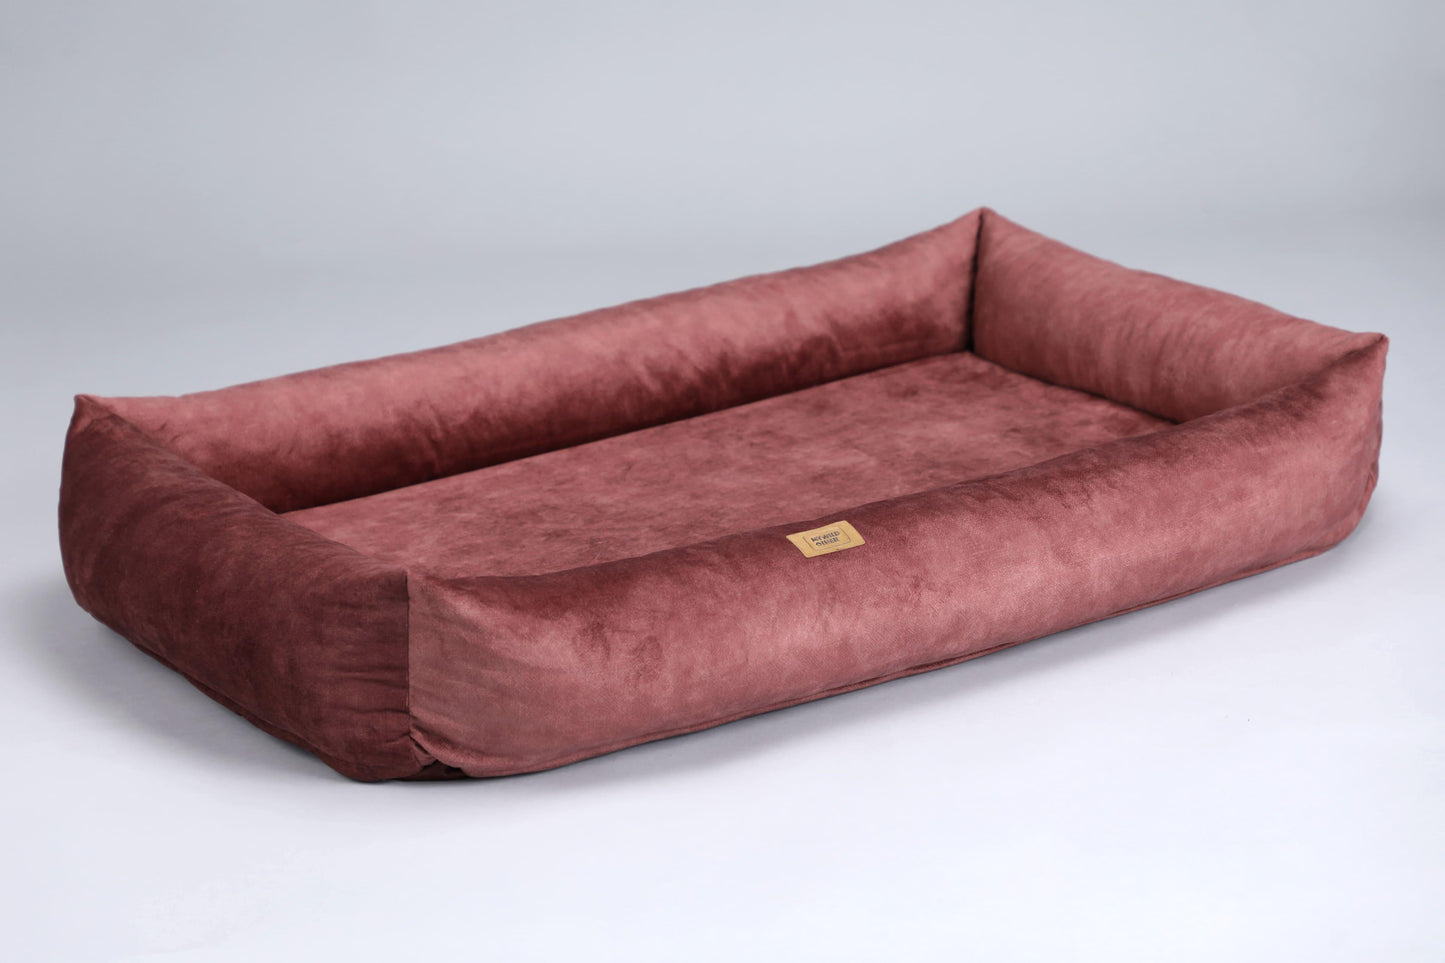 L only | 2-sided dog bed with sides. TERRACOTTA - premium dog goods handmade in Europe by animalistus